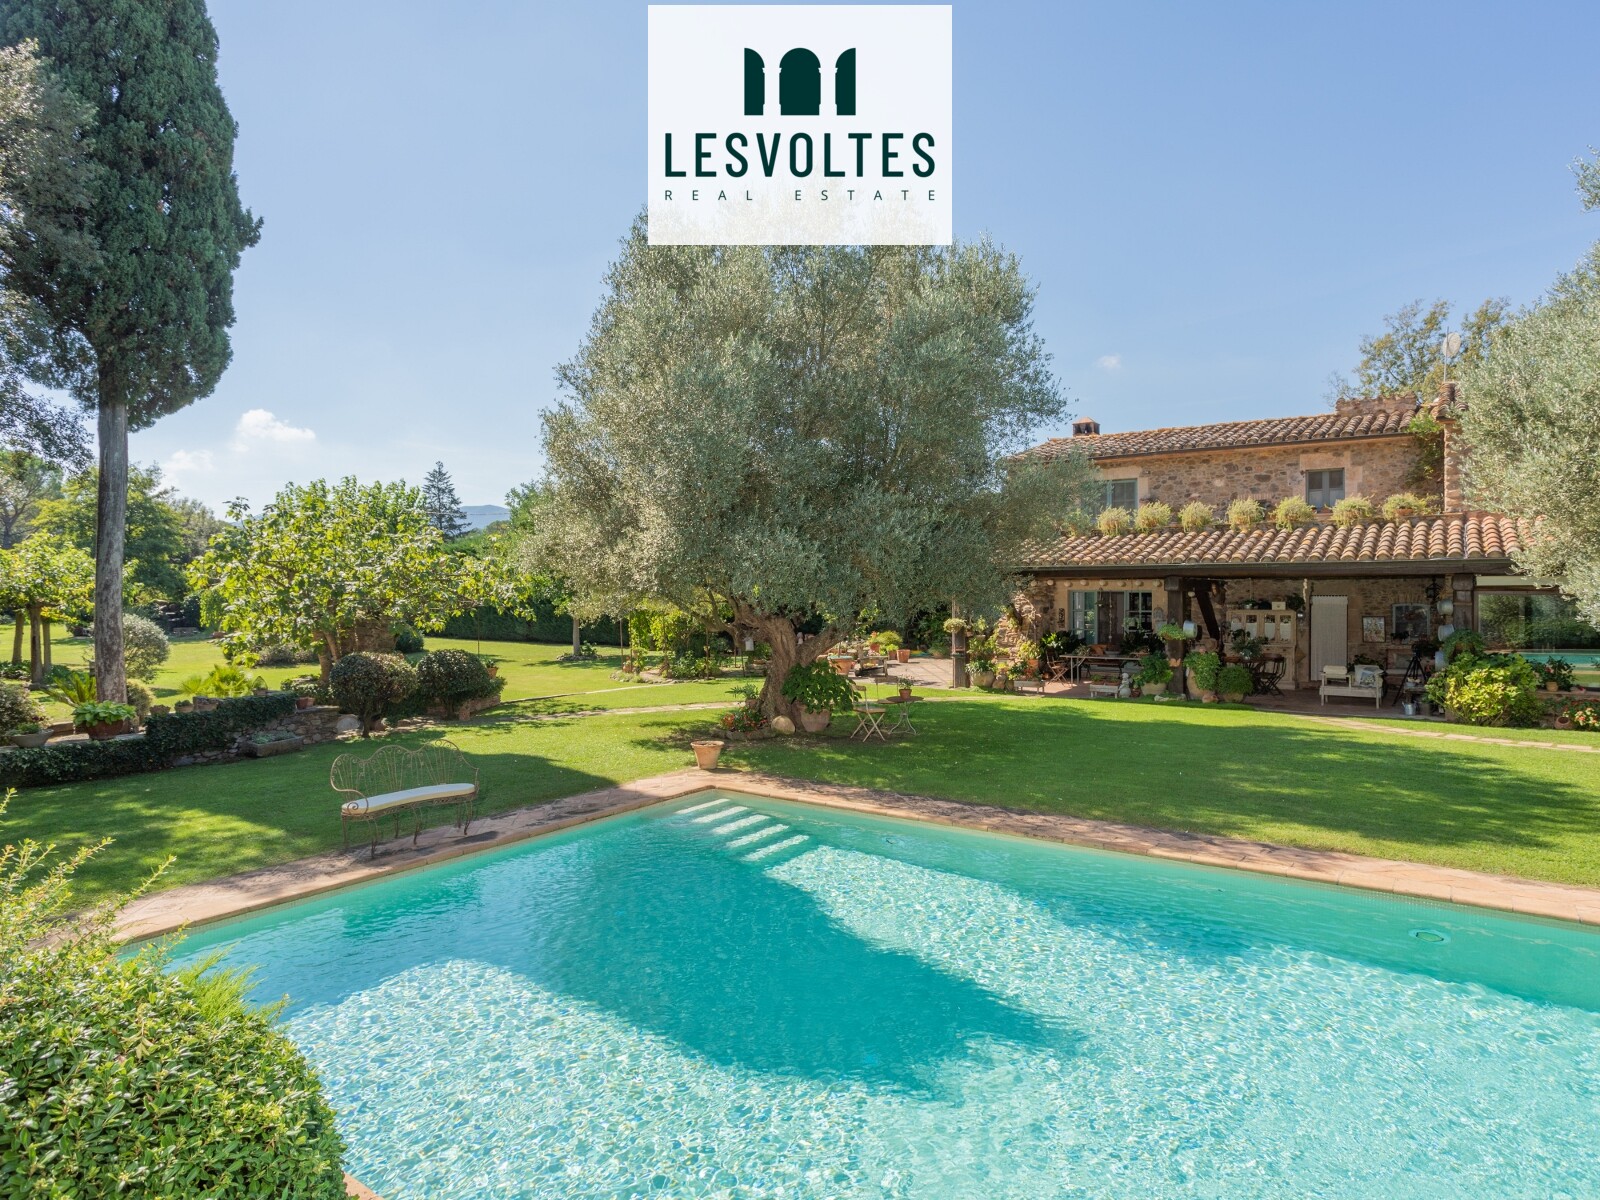 COZY CHARMING FARMHOUSE AND IMPECCABLE RENOVATION WITH FANTASTIC 6,600M2 GARDEN IN BAIX EMPORDÀ. SWIMMING POOL, WELL AND LARG